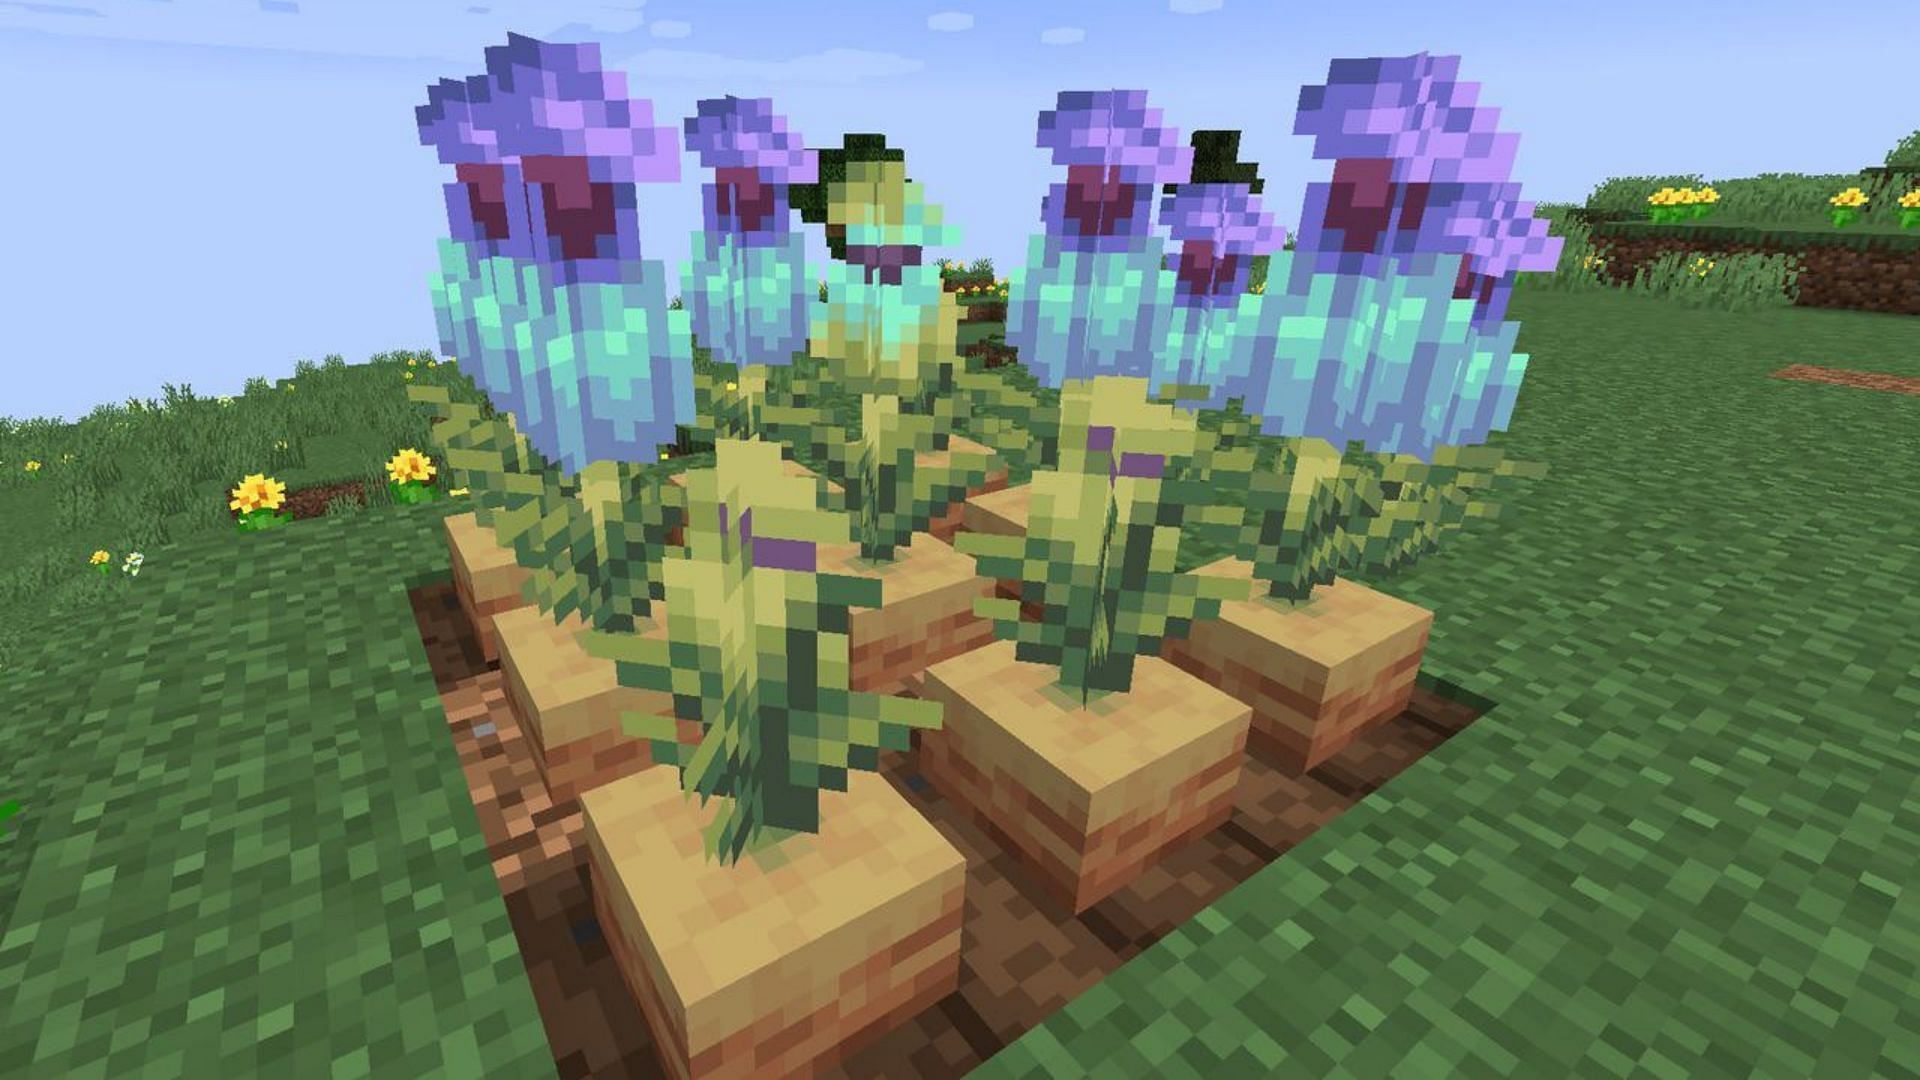 Minecraft players discuss about how useless pitcher plant is in Minecraft (Image via Reddit/u/Delicious_Bus_674)